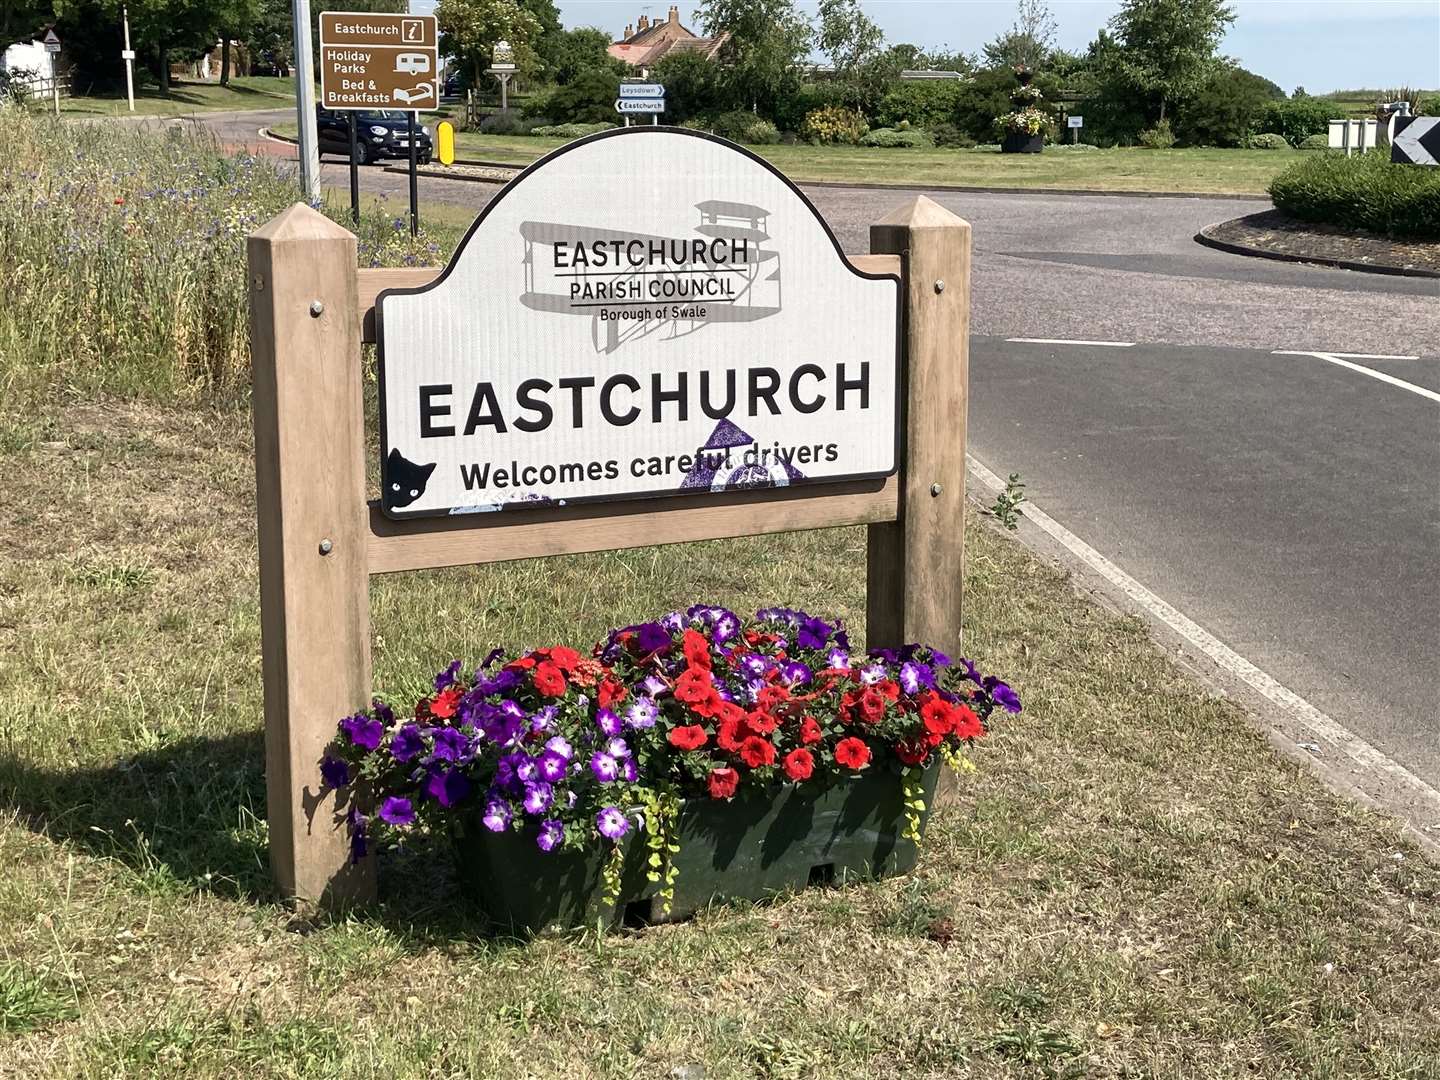 Entrance to Eastchurch village on the Isle of Sheppey